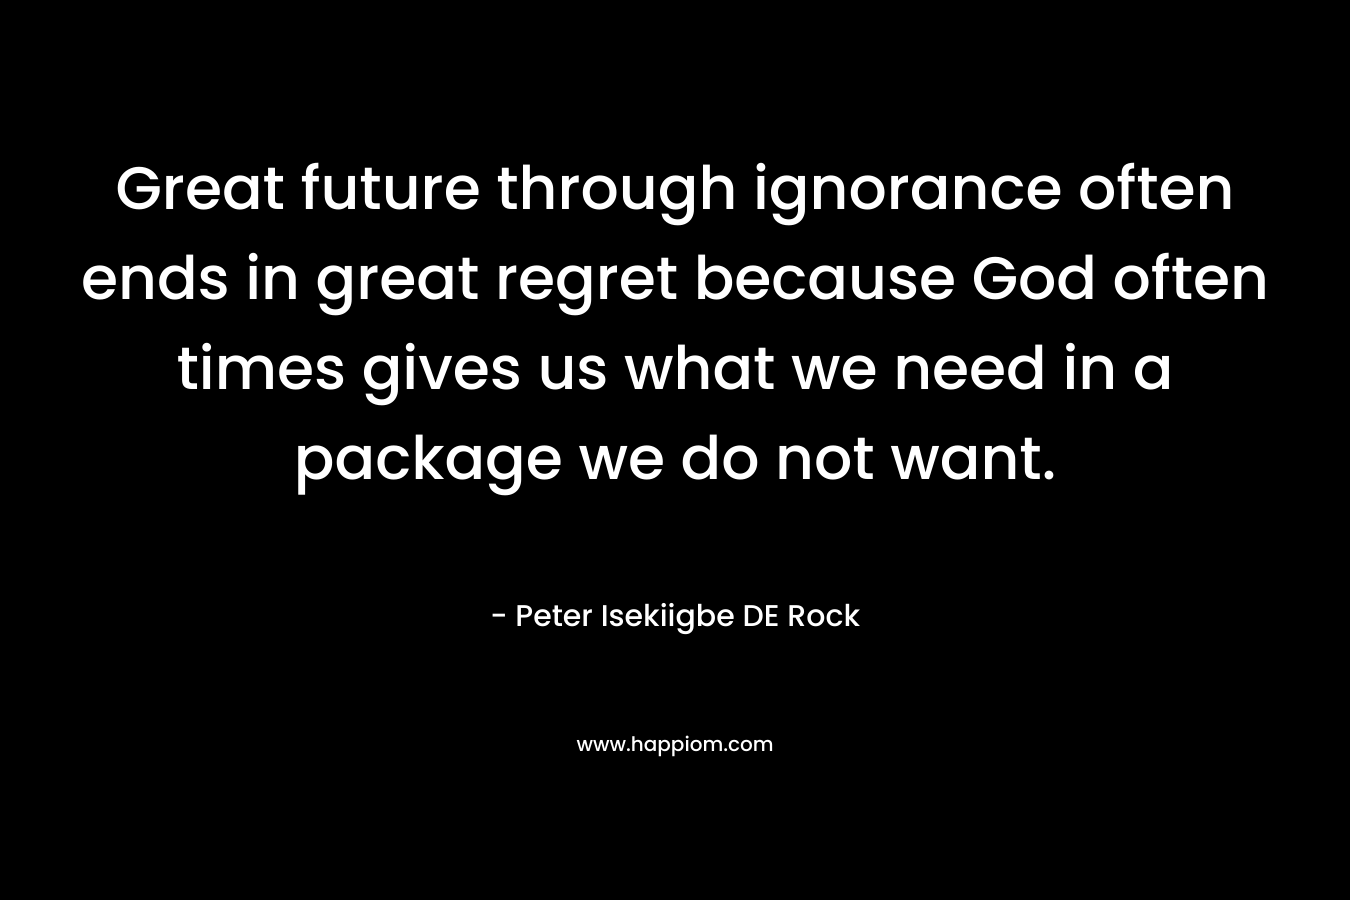 Great future through ignorance often ends in great regret because God often times gives us what we need in a package we do not want.